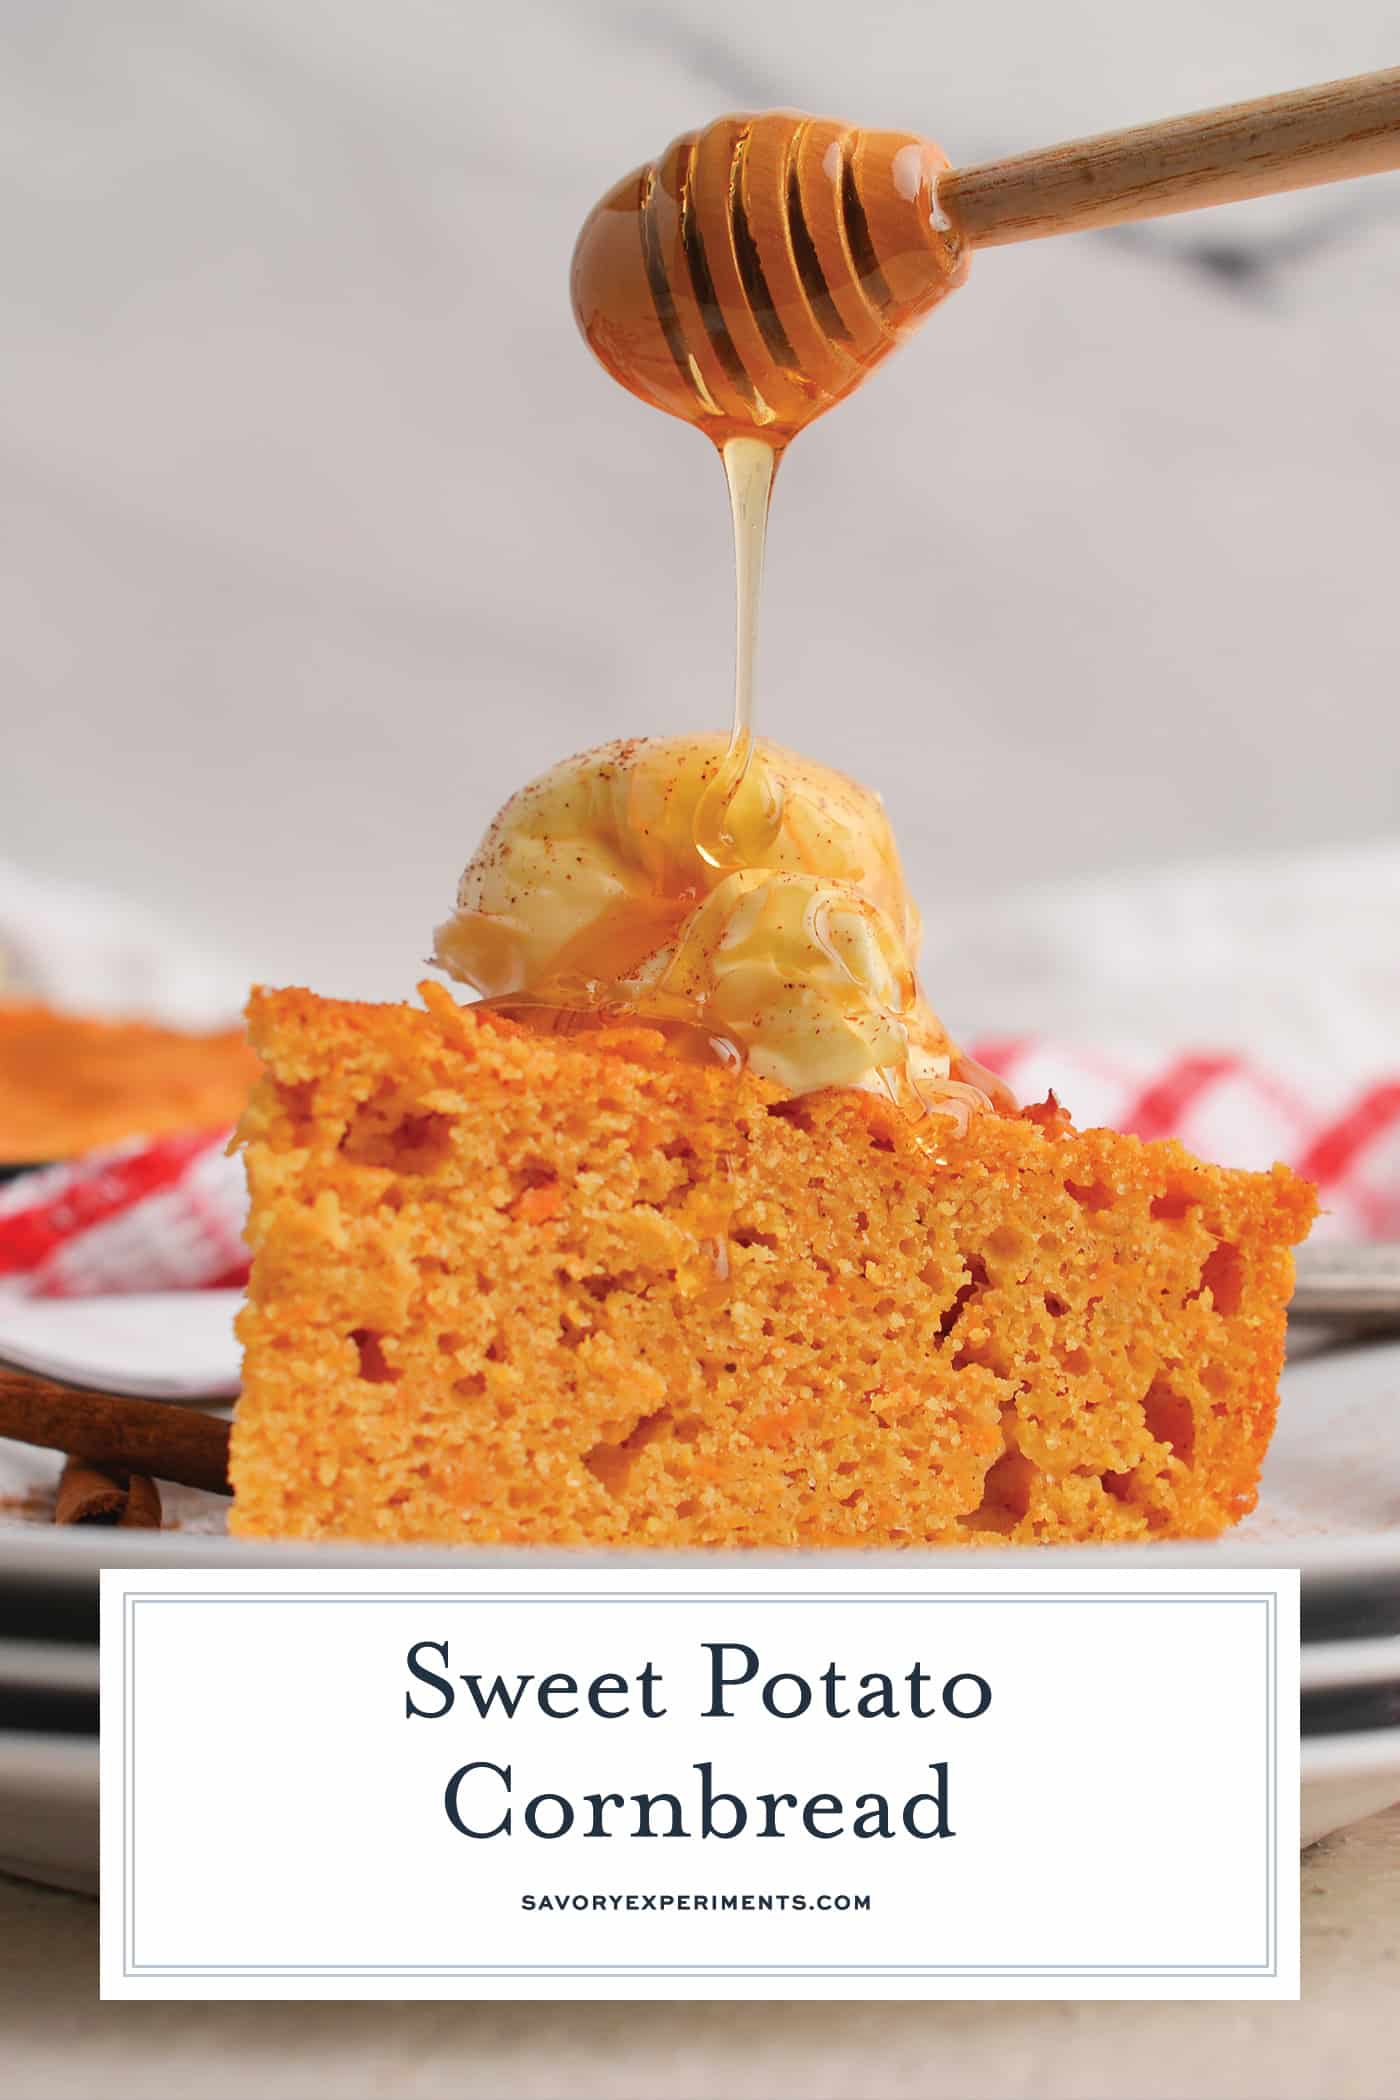 honey drizzled on slice of sweet potato cornbread with text overlay for pinterest